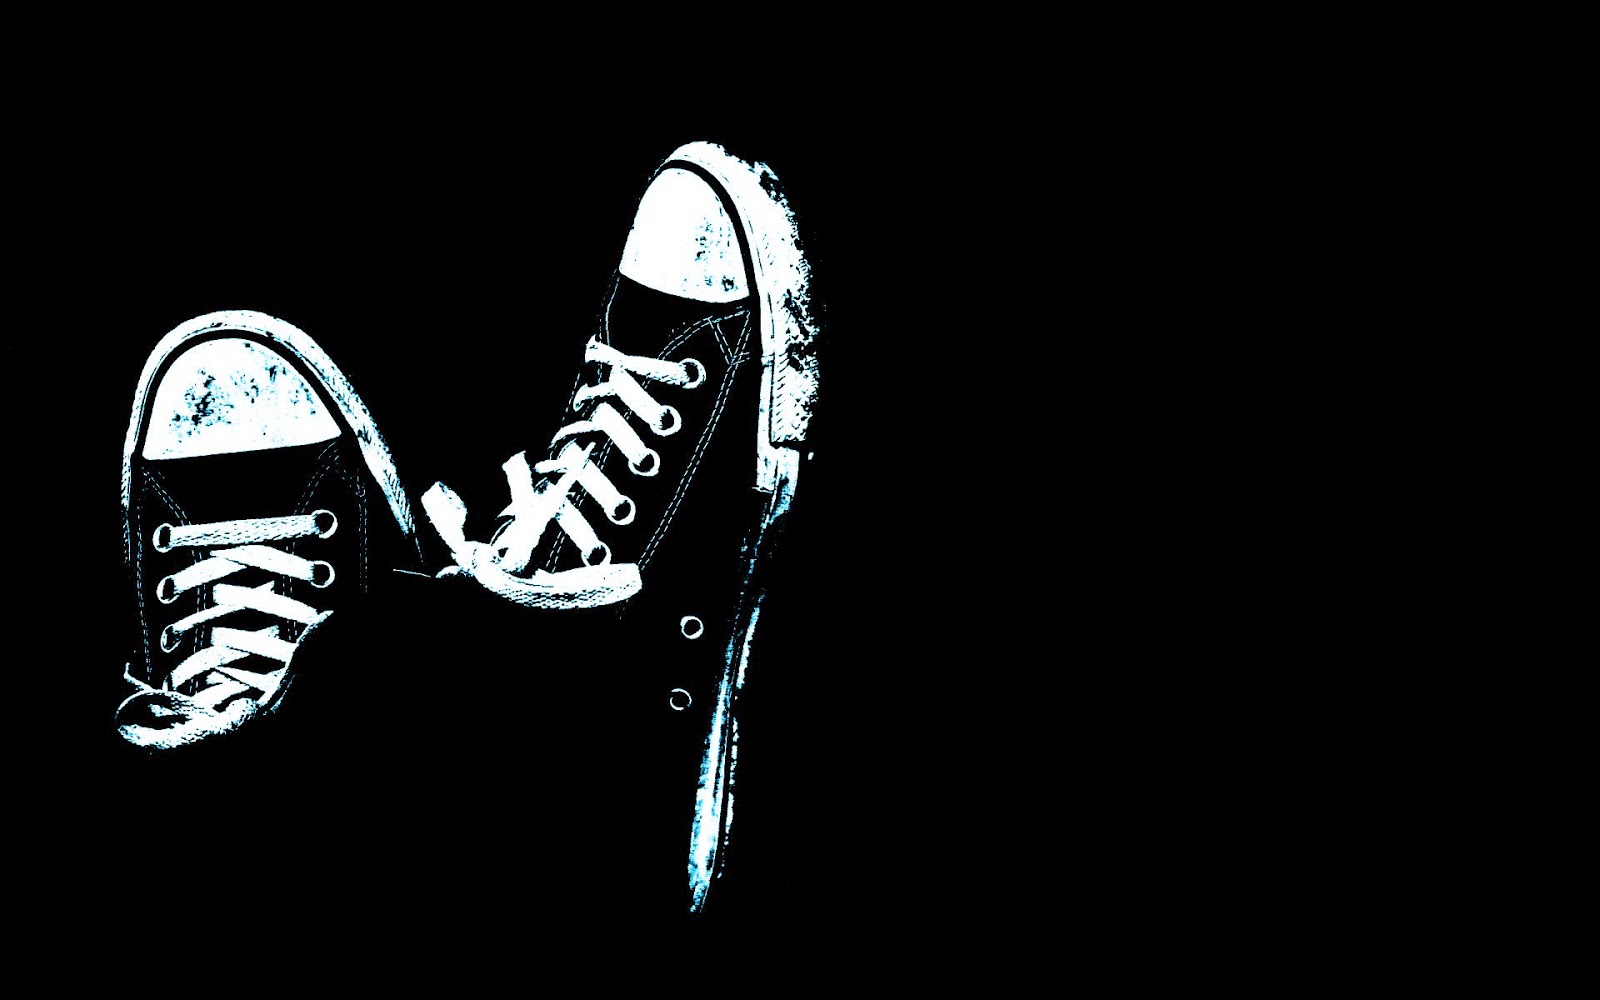 Shoes Picture, Shoes Image, Shoes Photo Hd, Shoes Background, - Shoes Or  People If They Hurt You They Are Not Your - 1600x1000 Wallpaper 